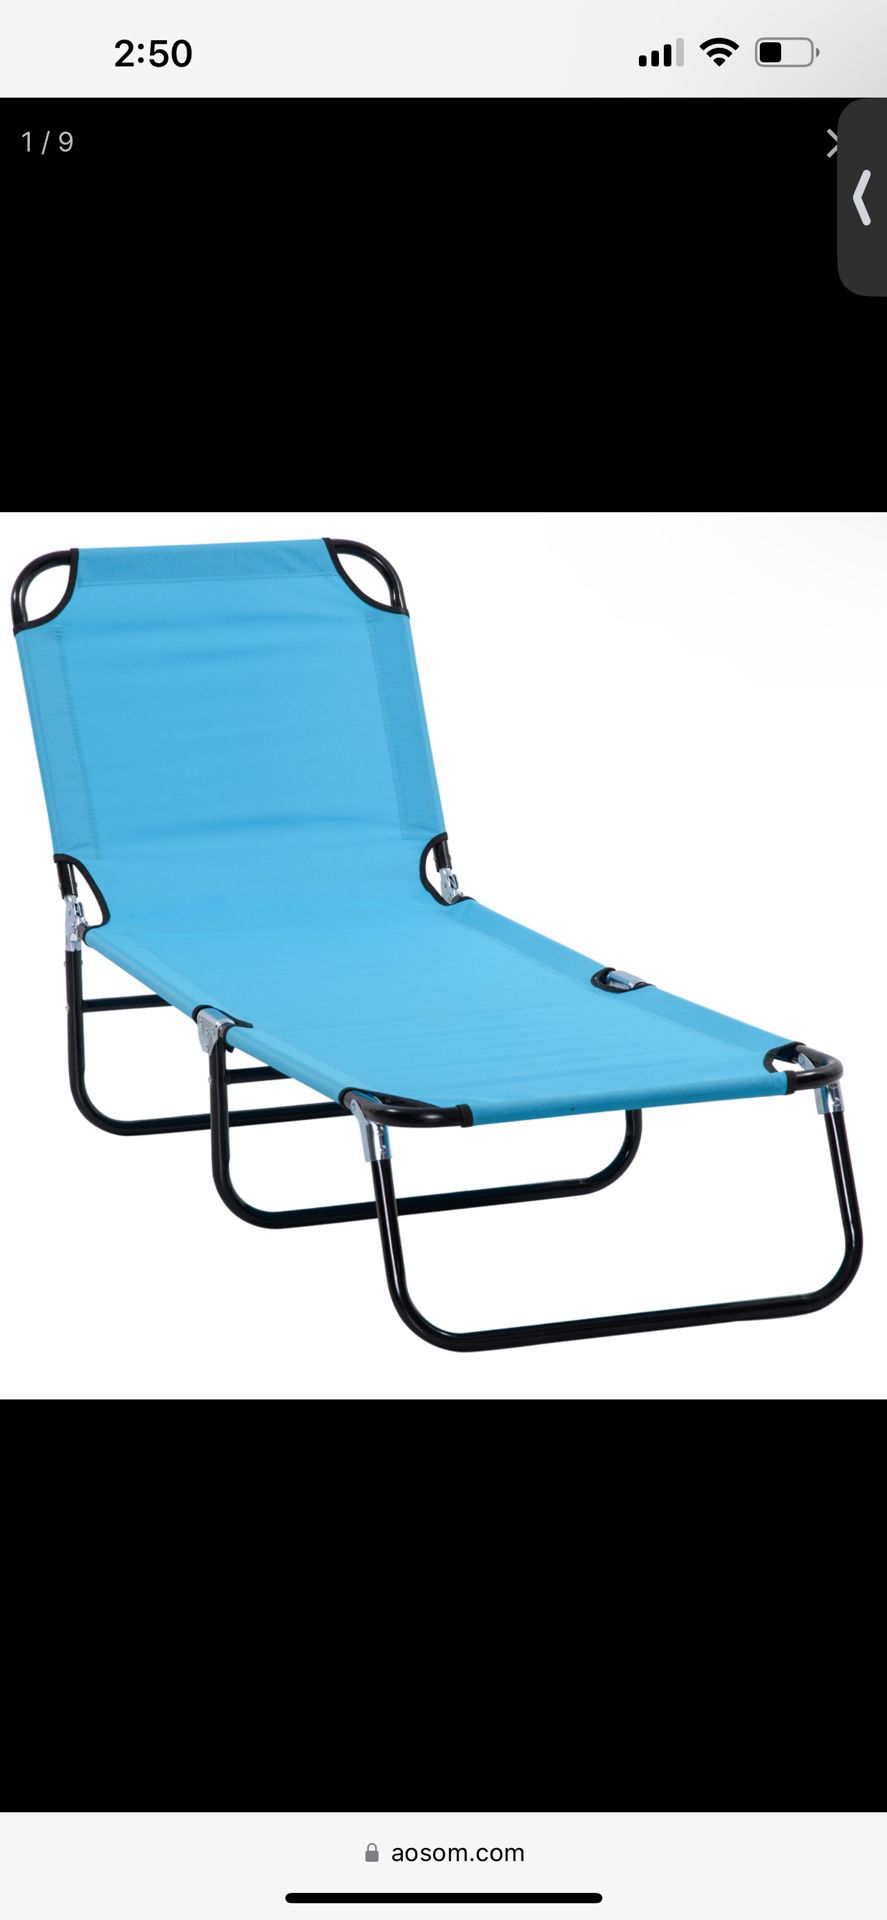 New in box Folding Chaise Lounge Pool Chairs, Outdoor Sun Tanning Chairs with 5-Level Reclining Back, Steel Frame for Beach, Yard, Patio, Sky Blue(84b